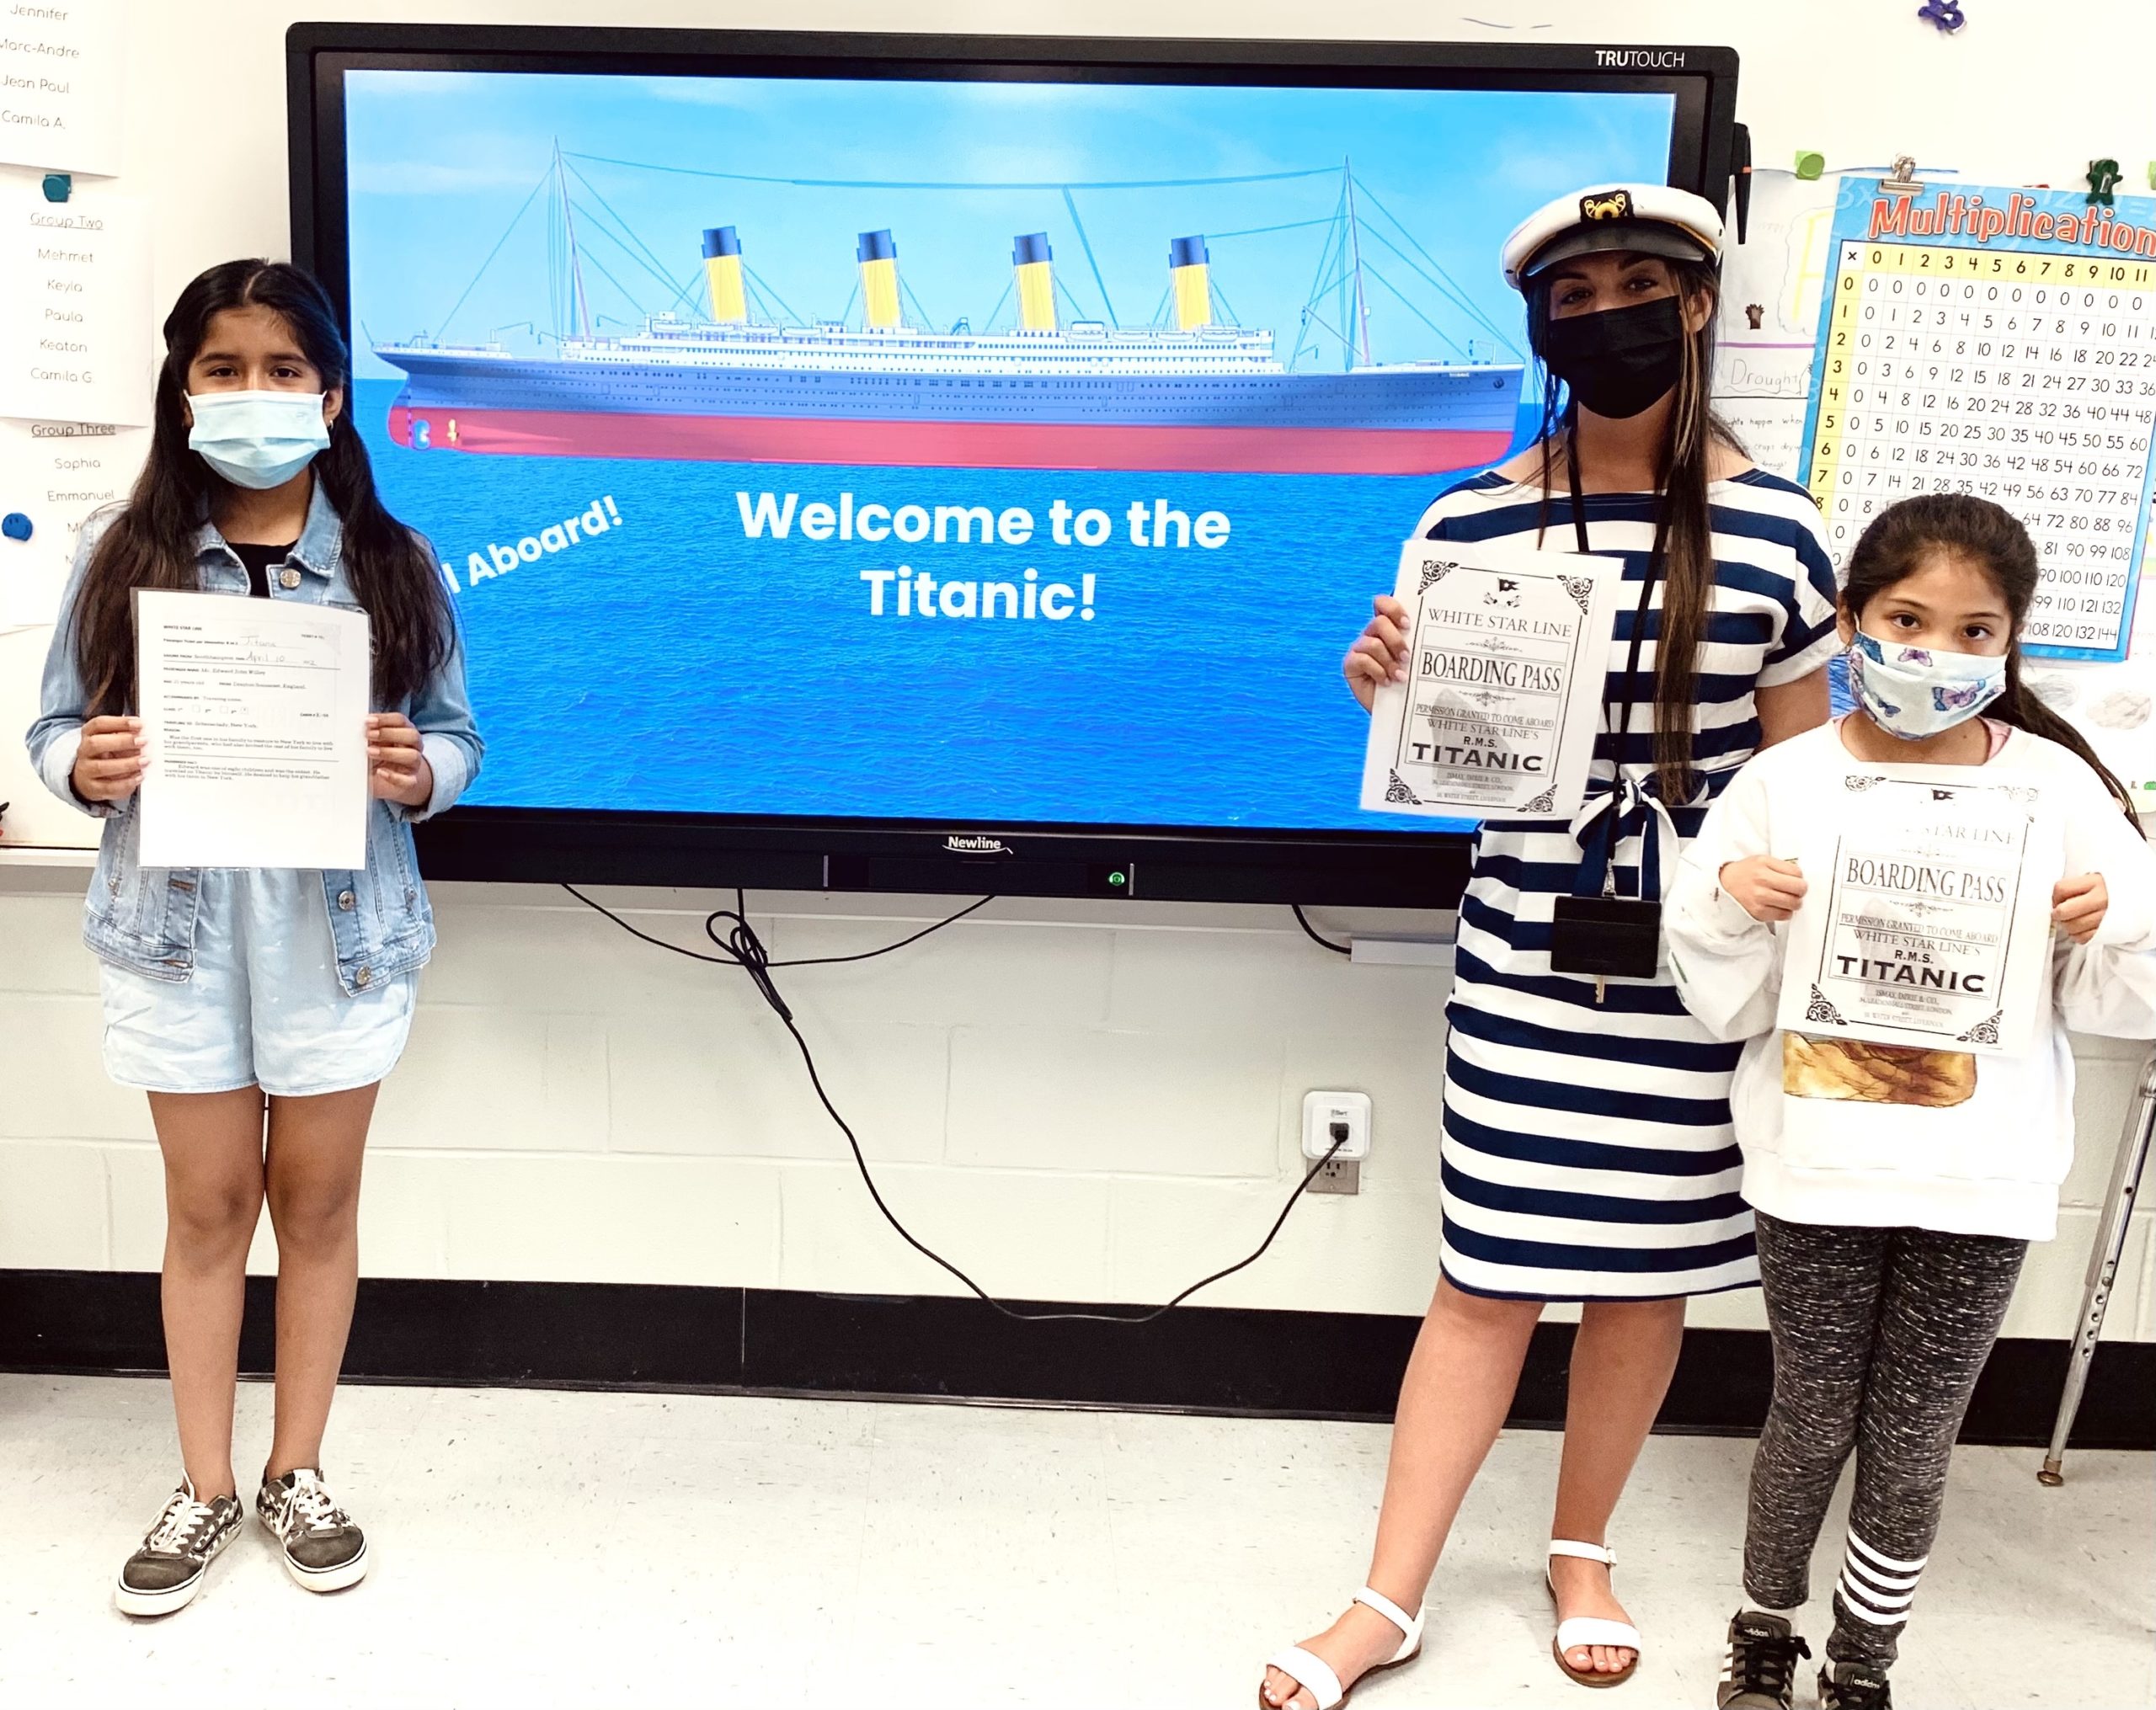 Krista Savino’s fourth grade class at Hampton Bays Elementary School recently participated in an engaging lesson about the Titanic. Each student received a boarding pass with the name of a real Titanic passenger. They then researched the individual passengers, noting what class they would have been in and whether they made it off the Titanic.